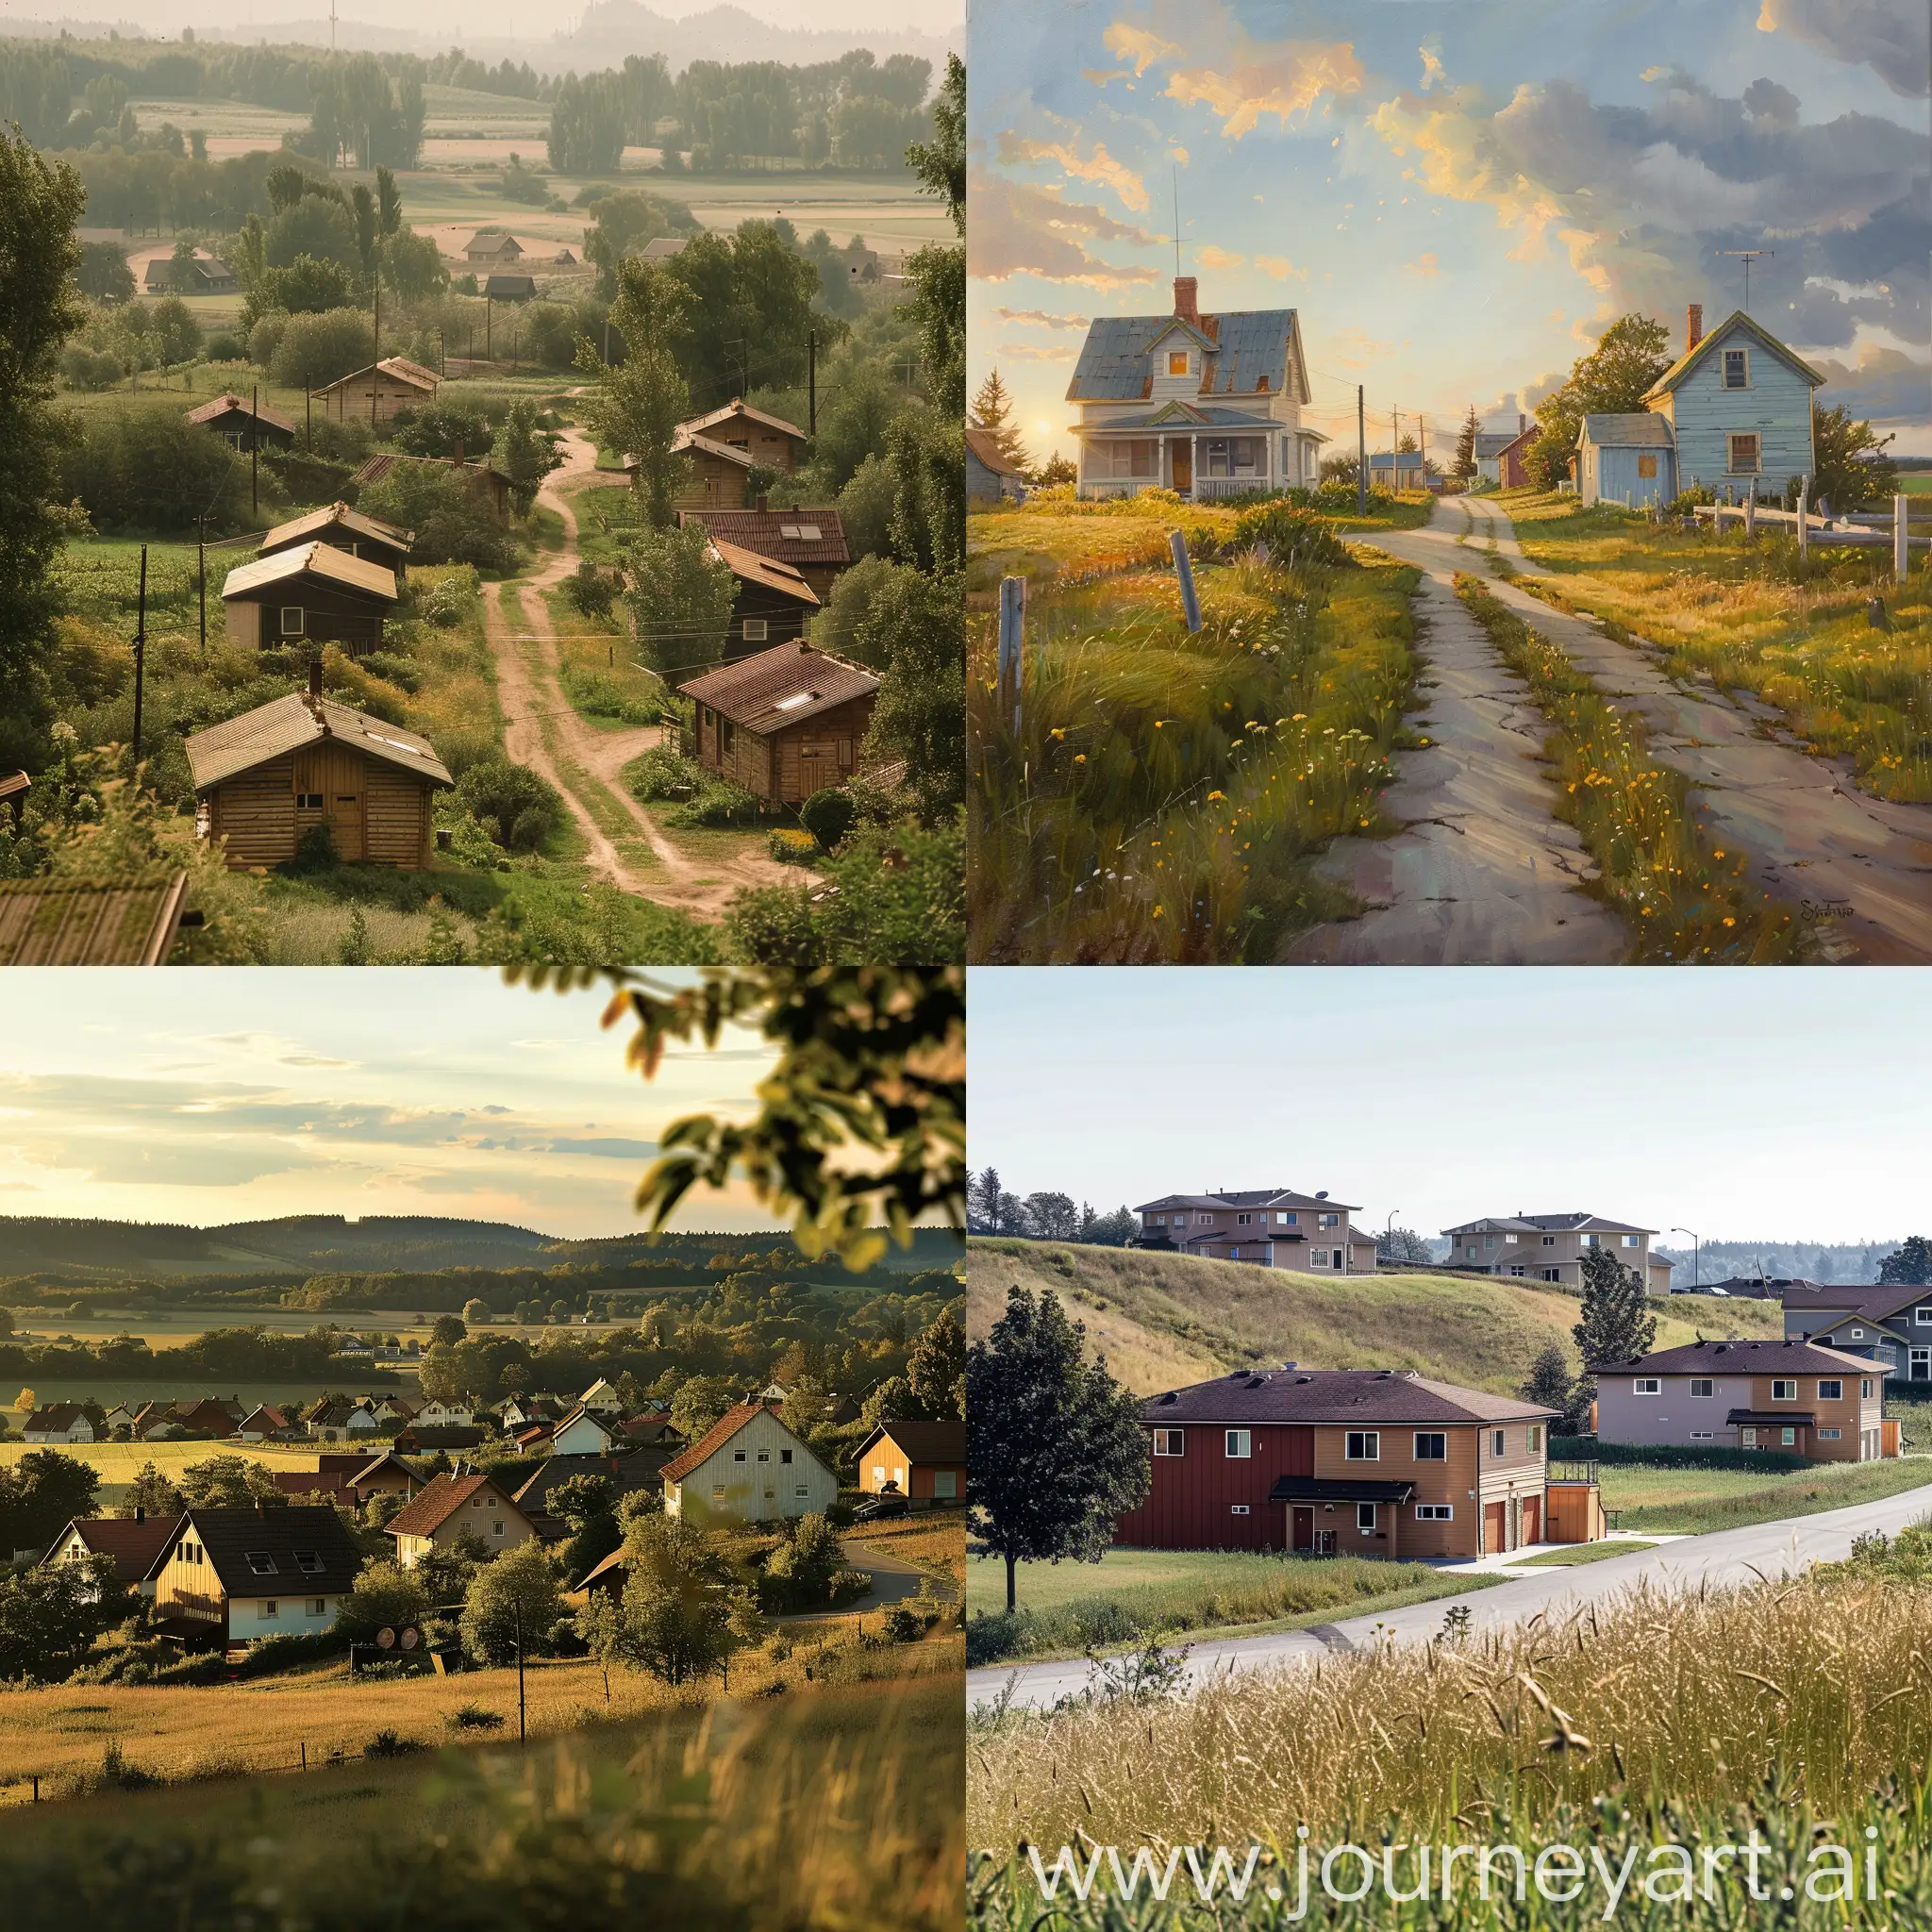 Scenic-Rural-Landscape-with-Panel-Houses